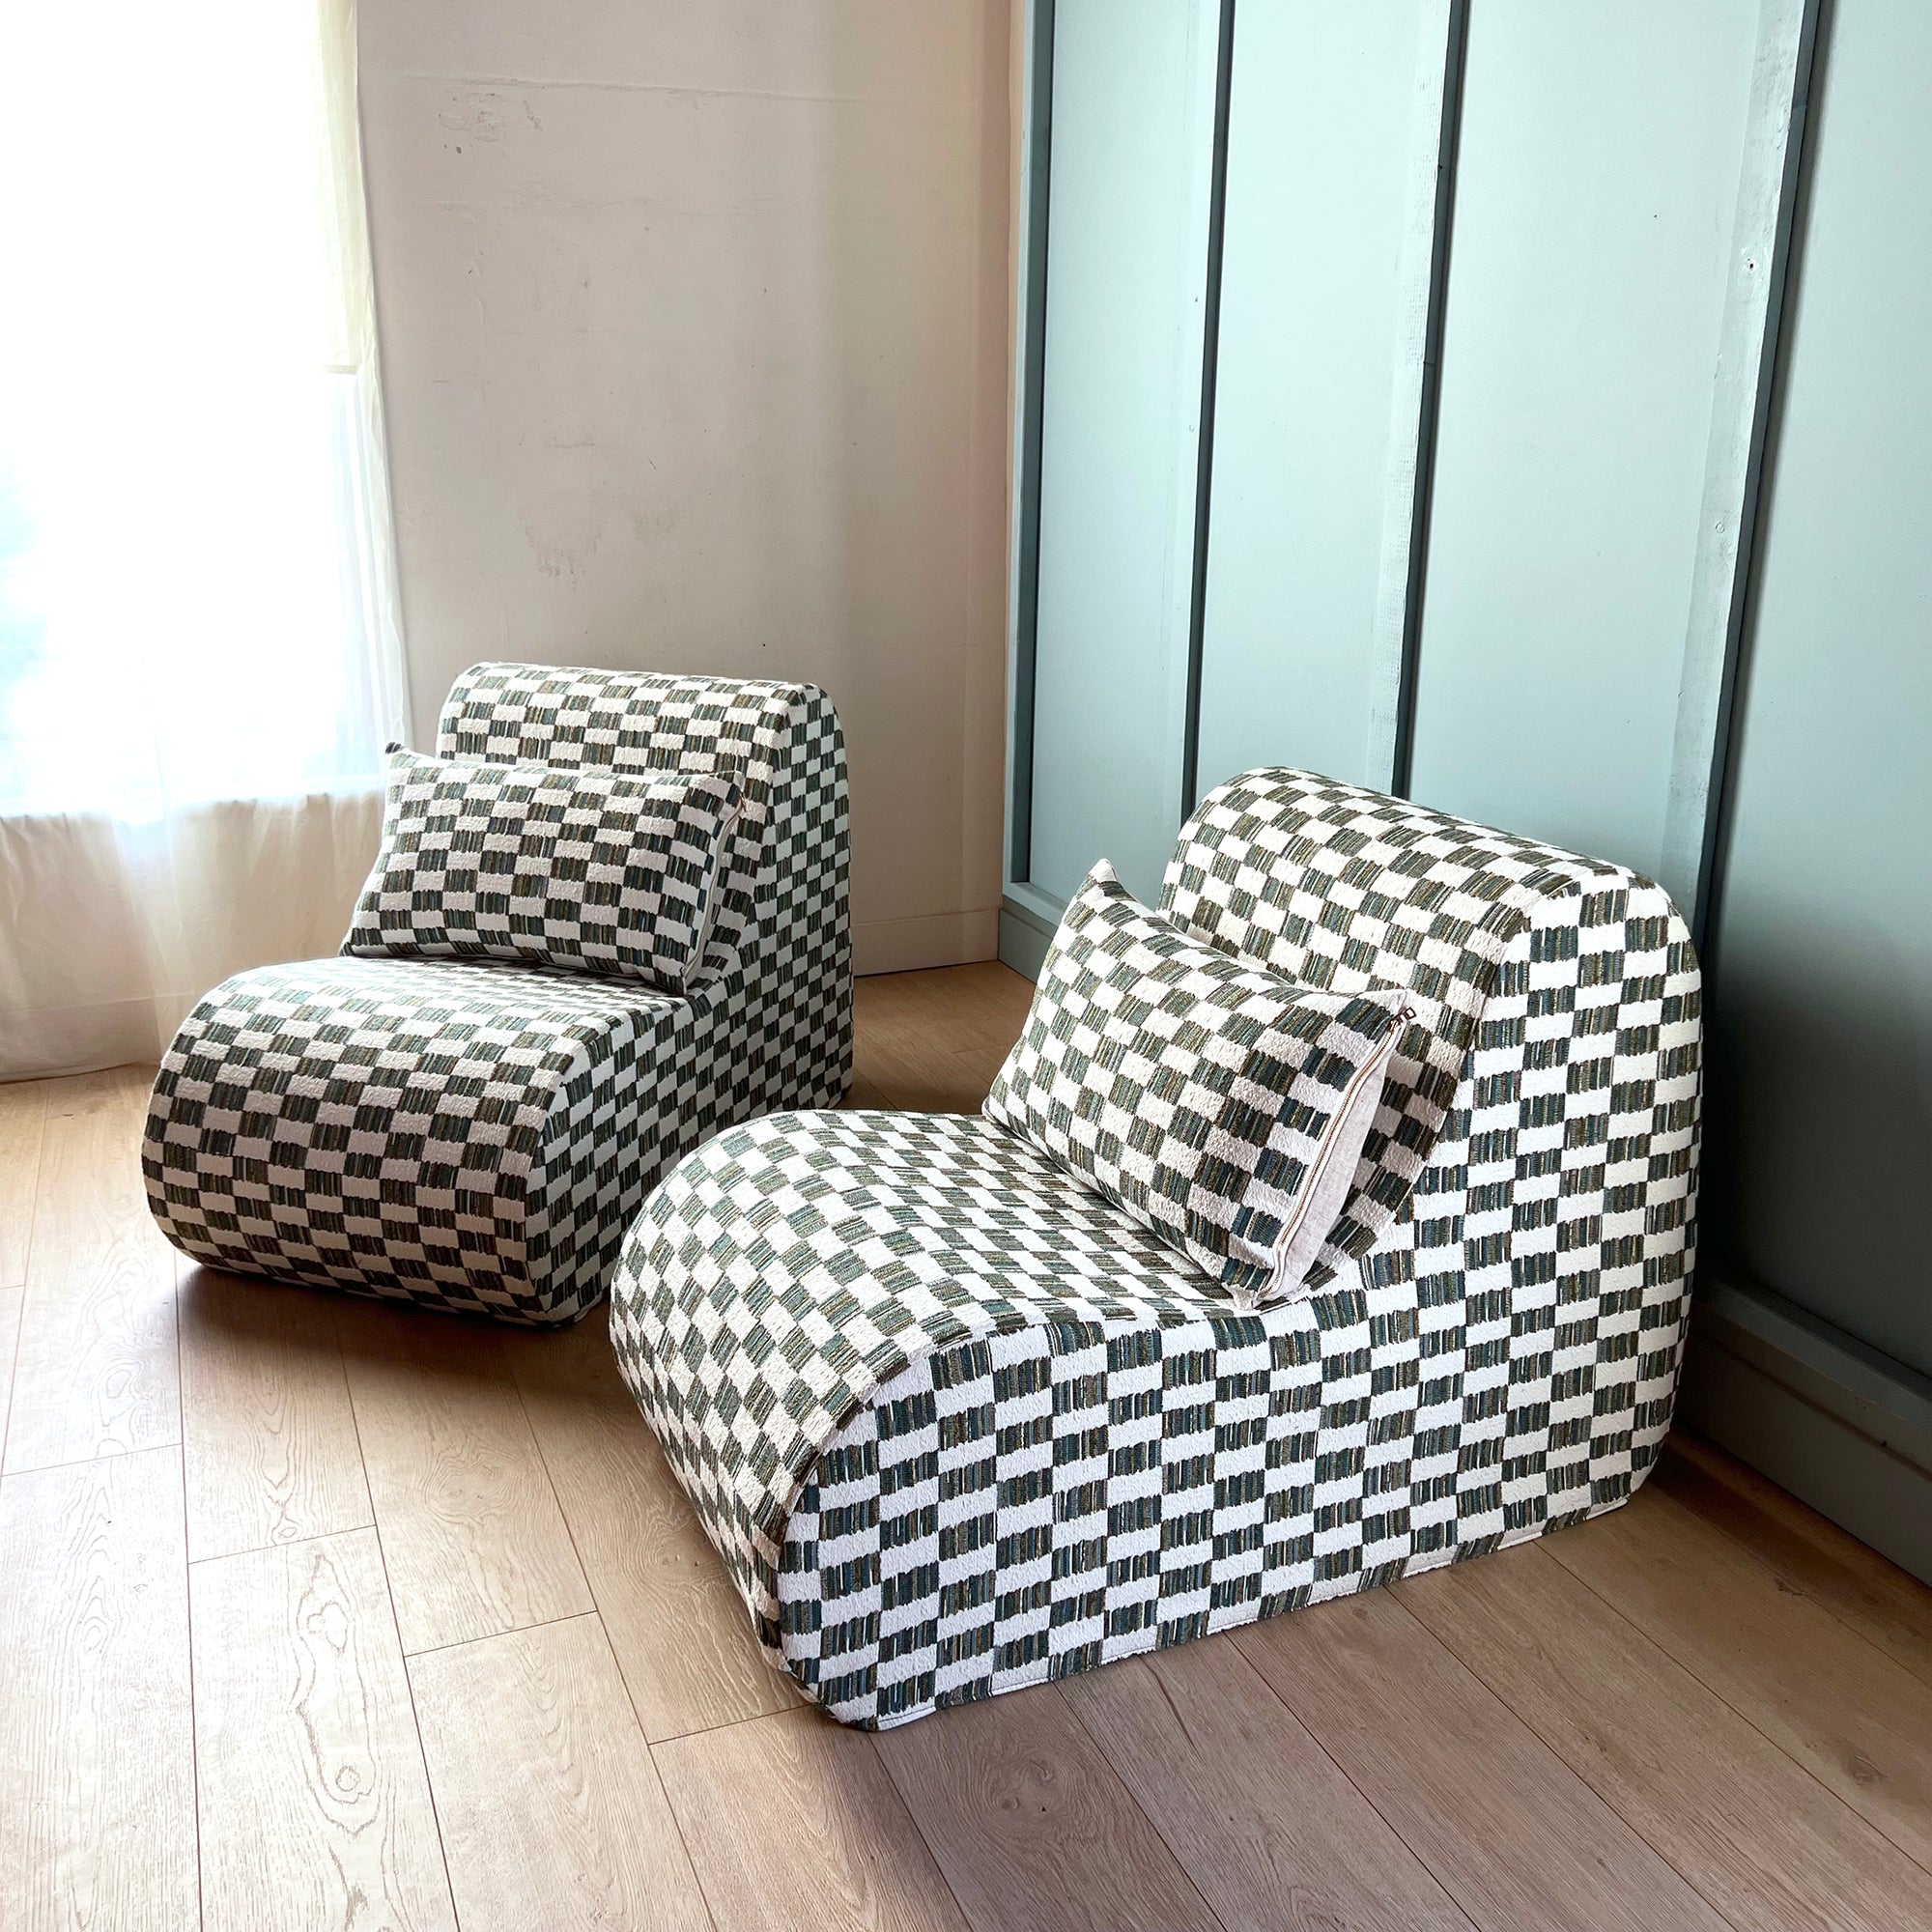 Set of Two - The Curve Chair - Newly Upholstered